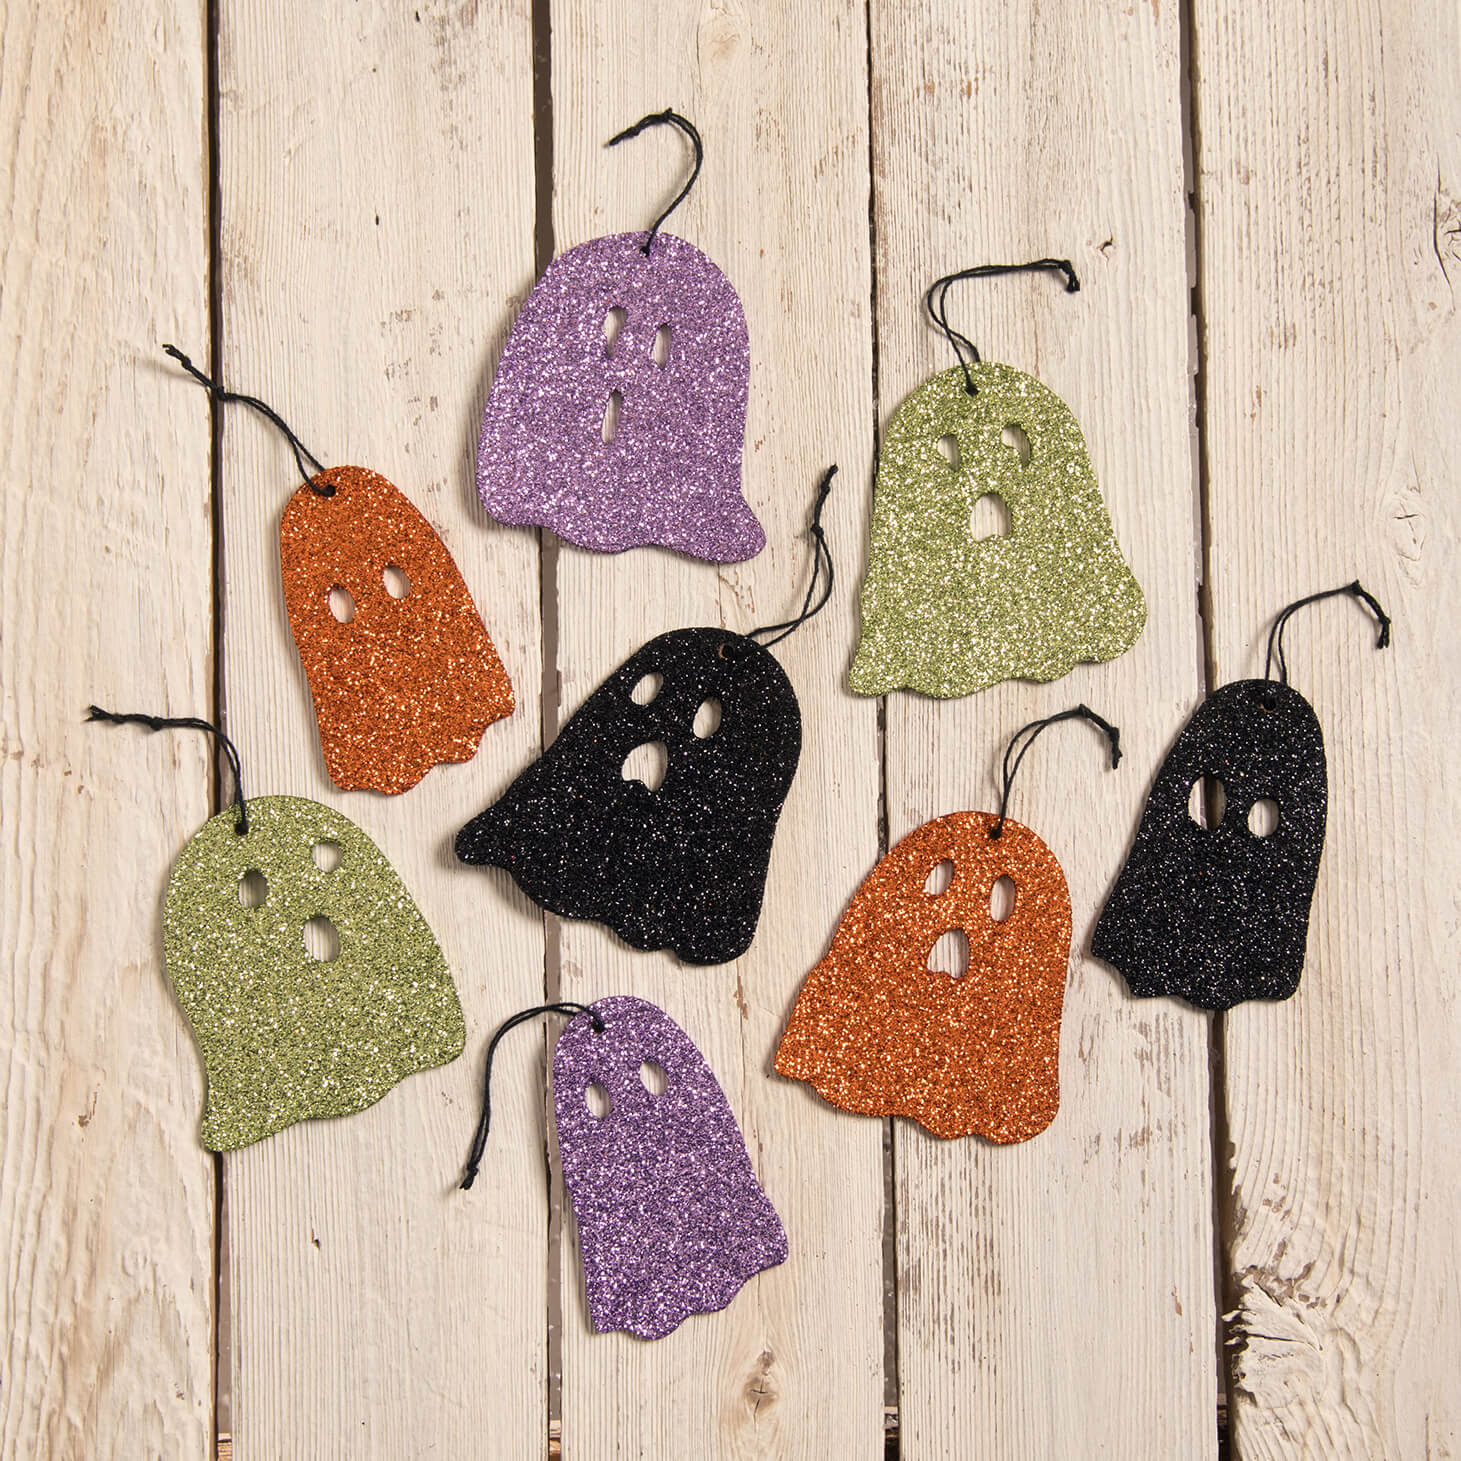 Ghostie Boo's Ornaments Set/8